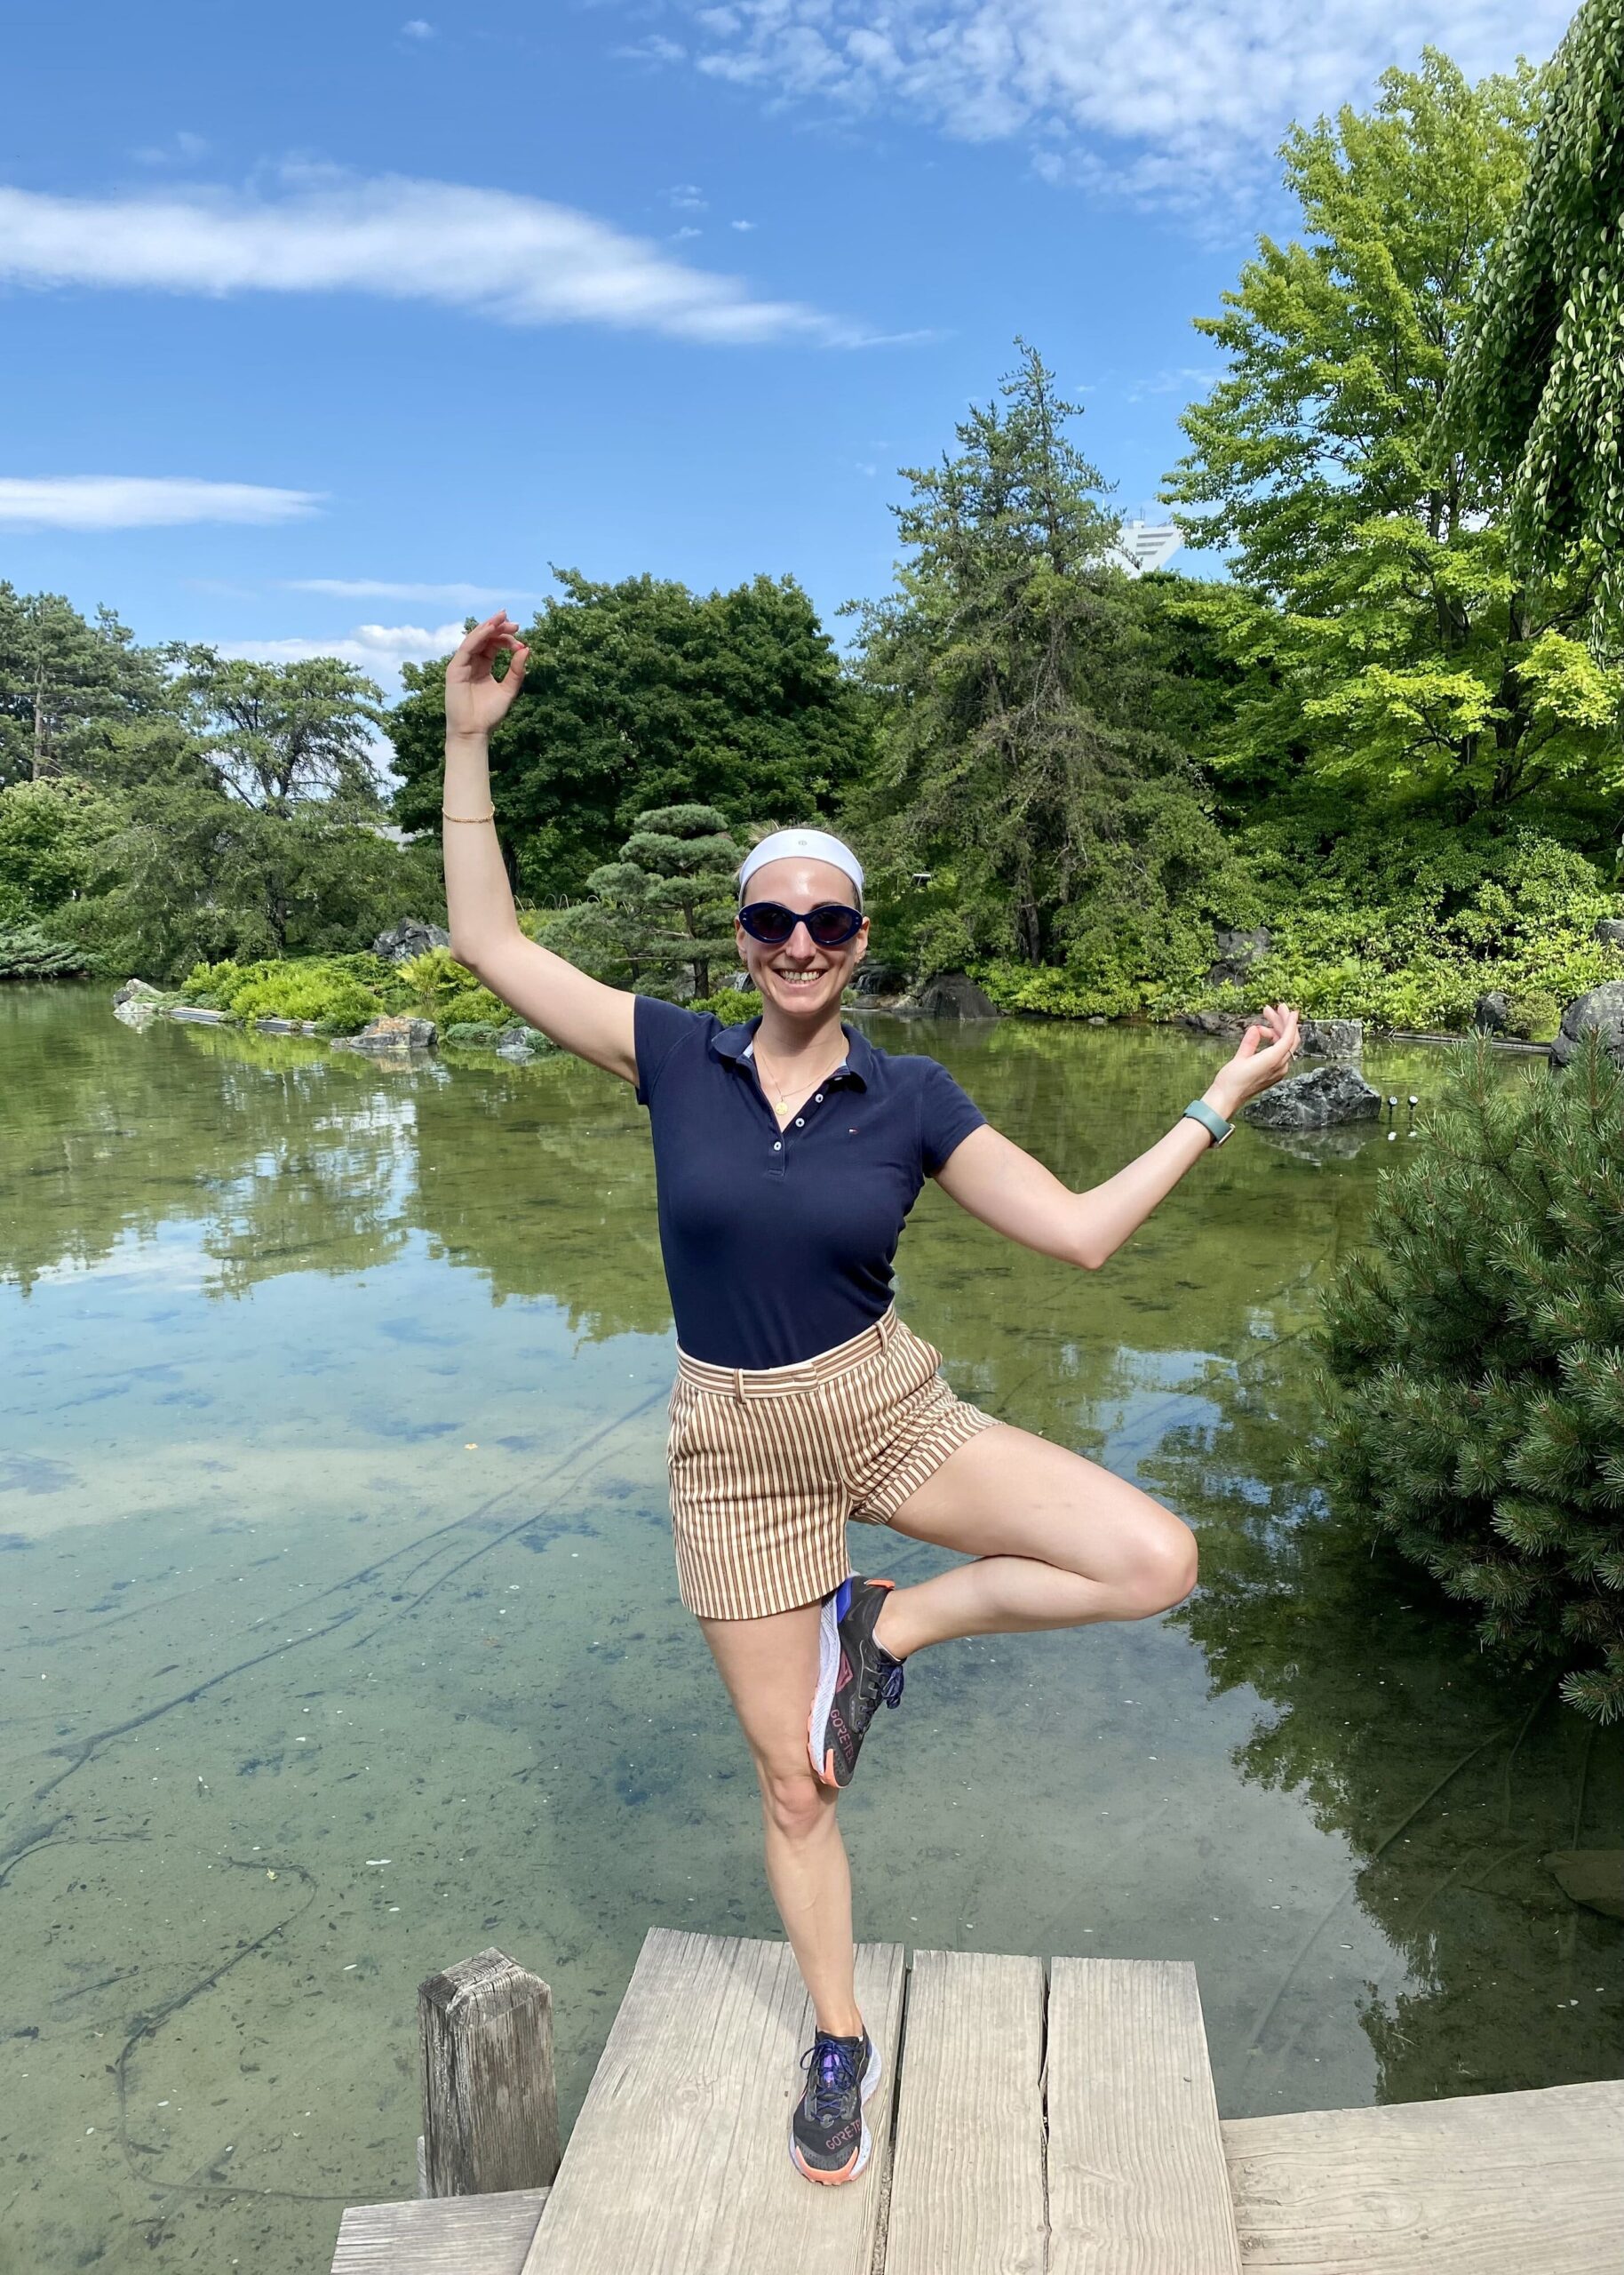 Astrid in Yoga pose in the Montreal Botanical Gardens | Ode2style.com